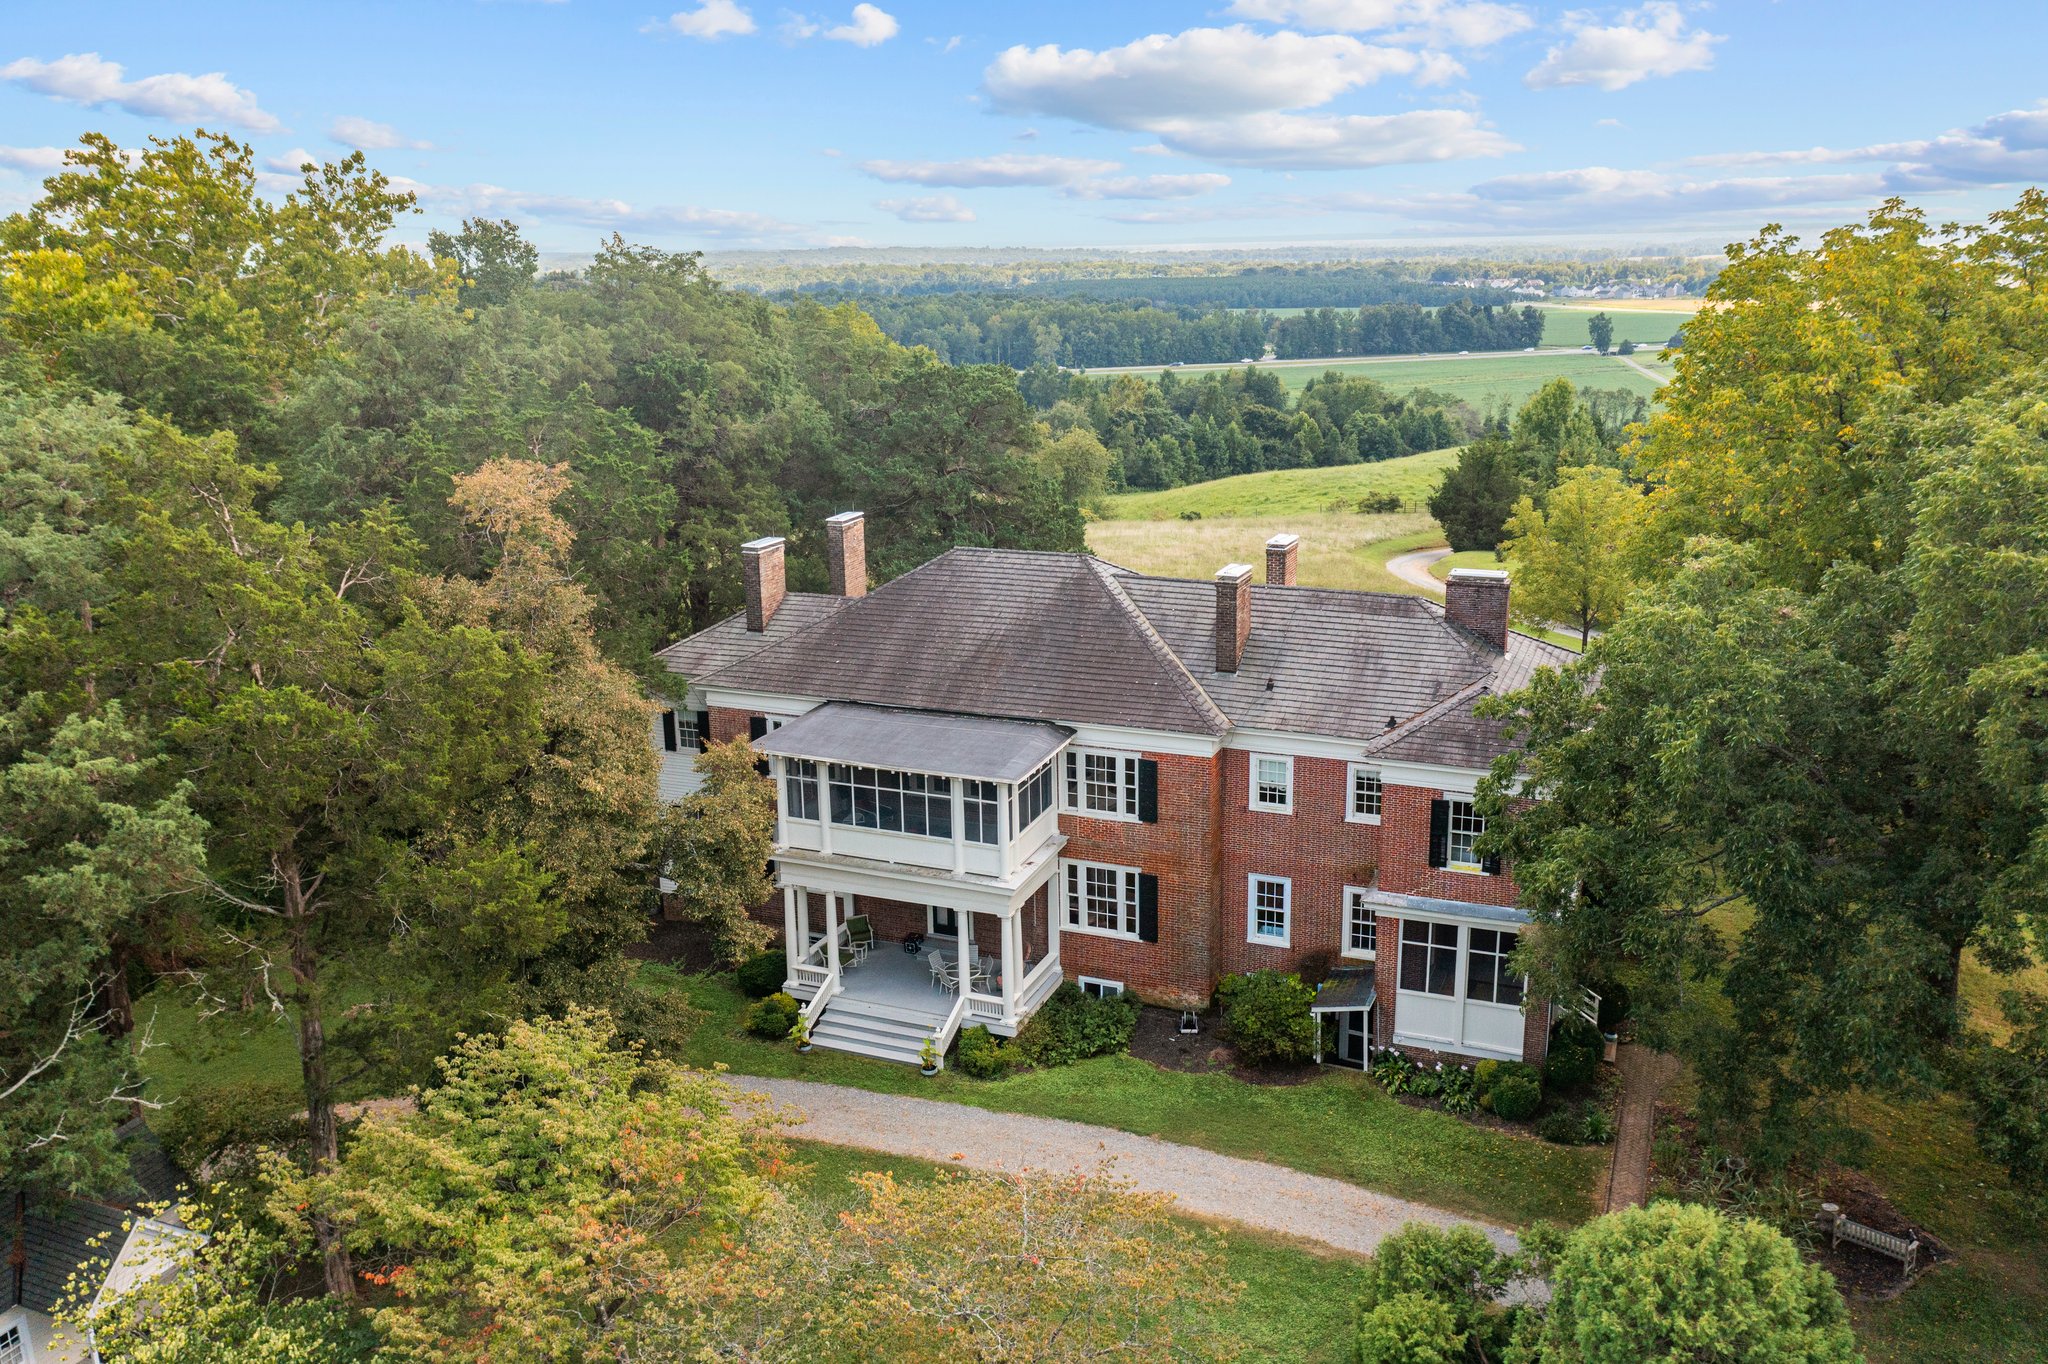 A two story, red-brick estate surrounded by trees.